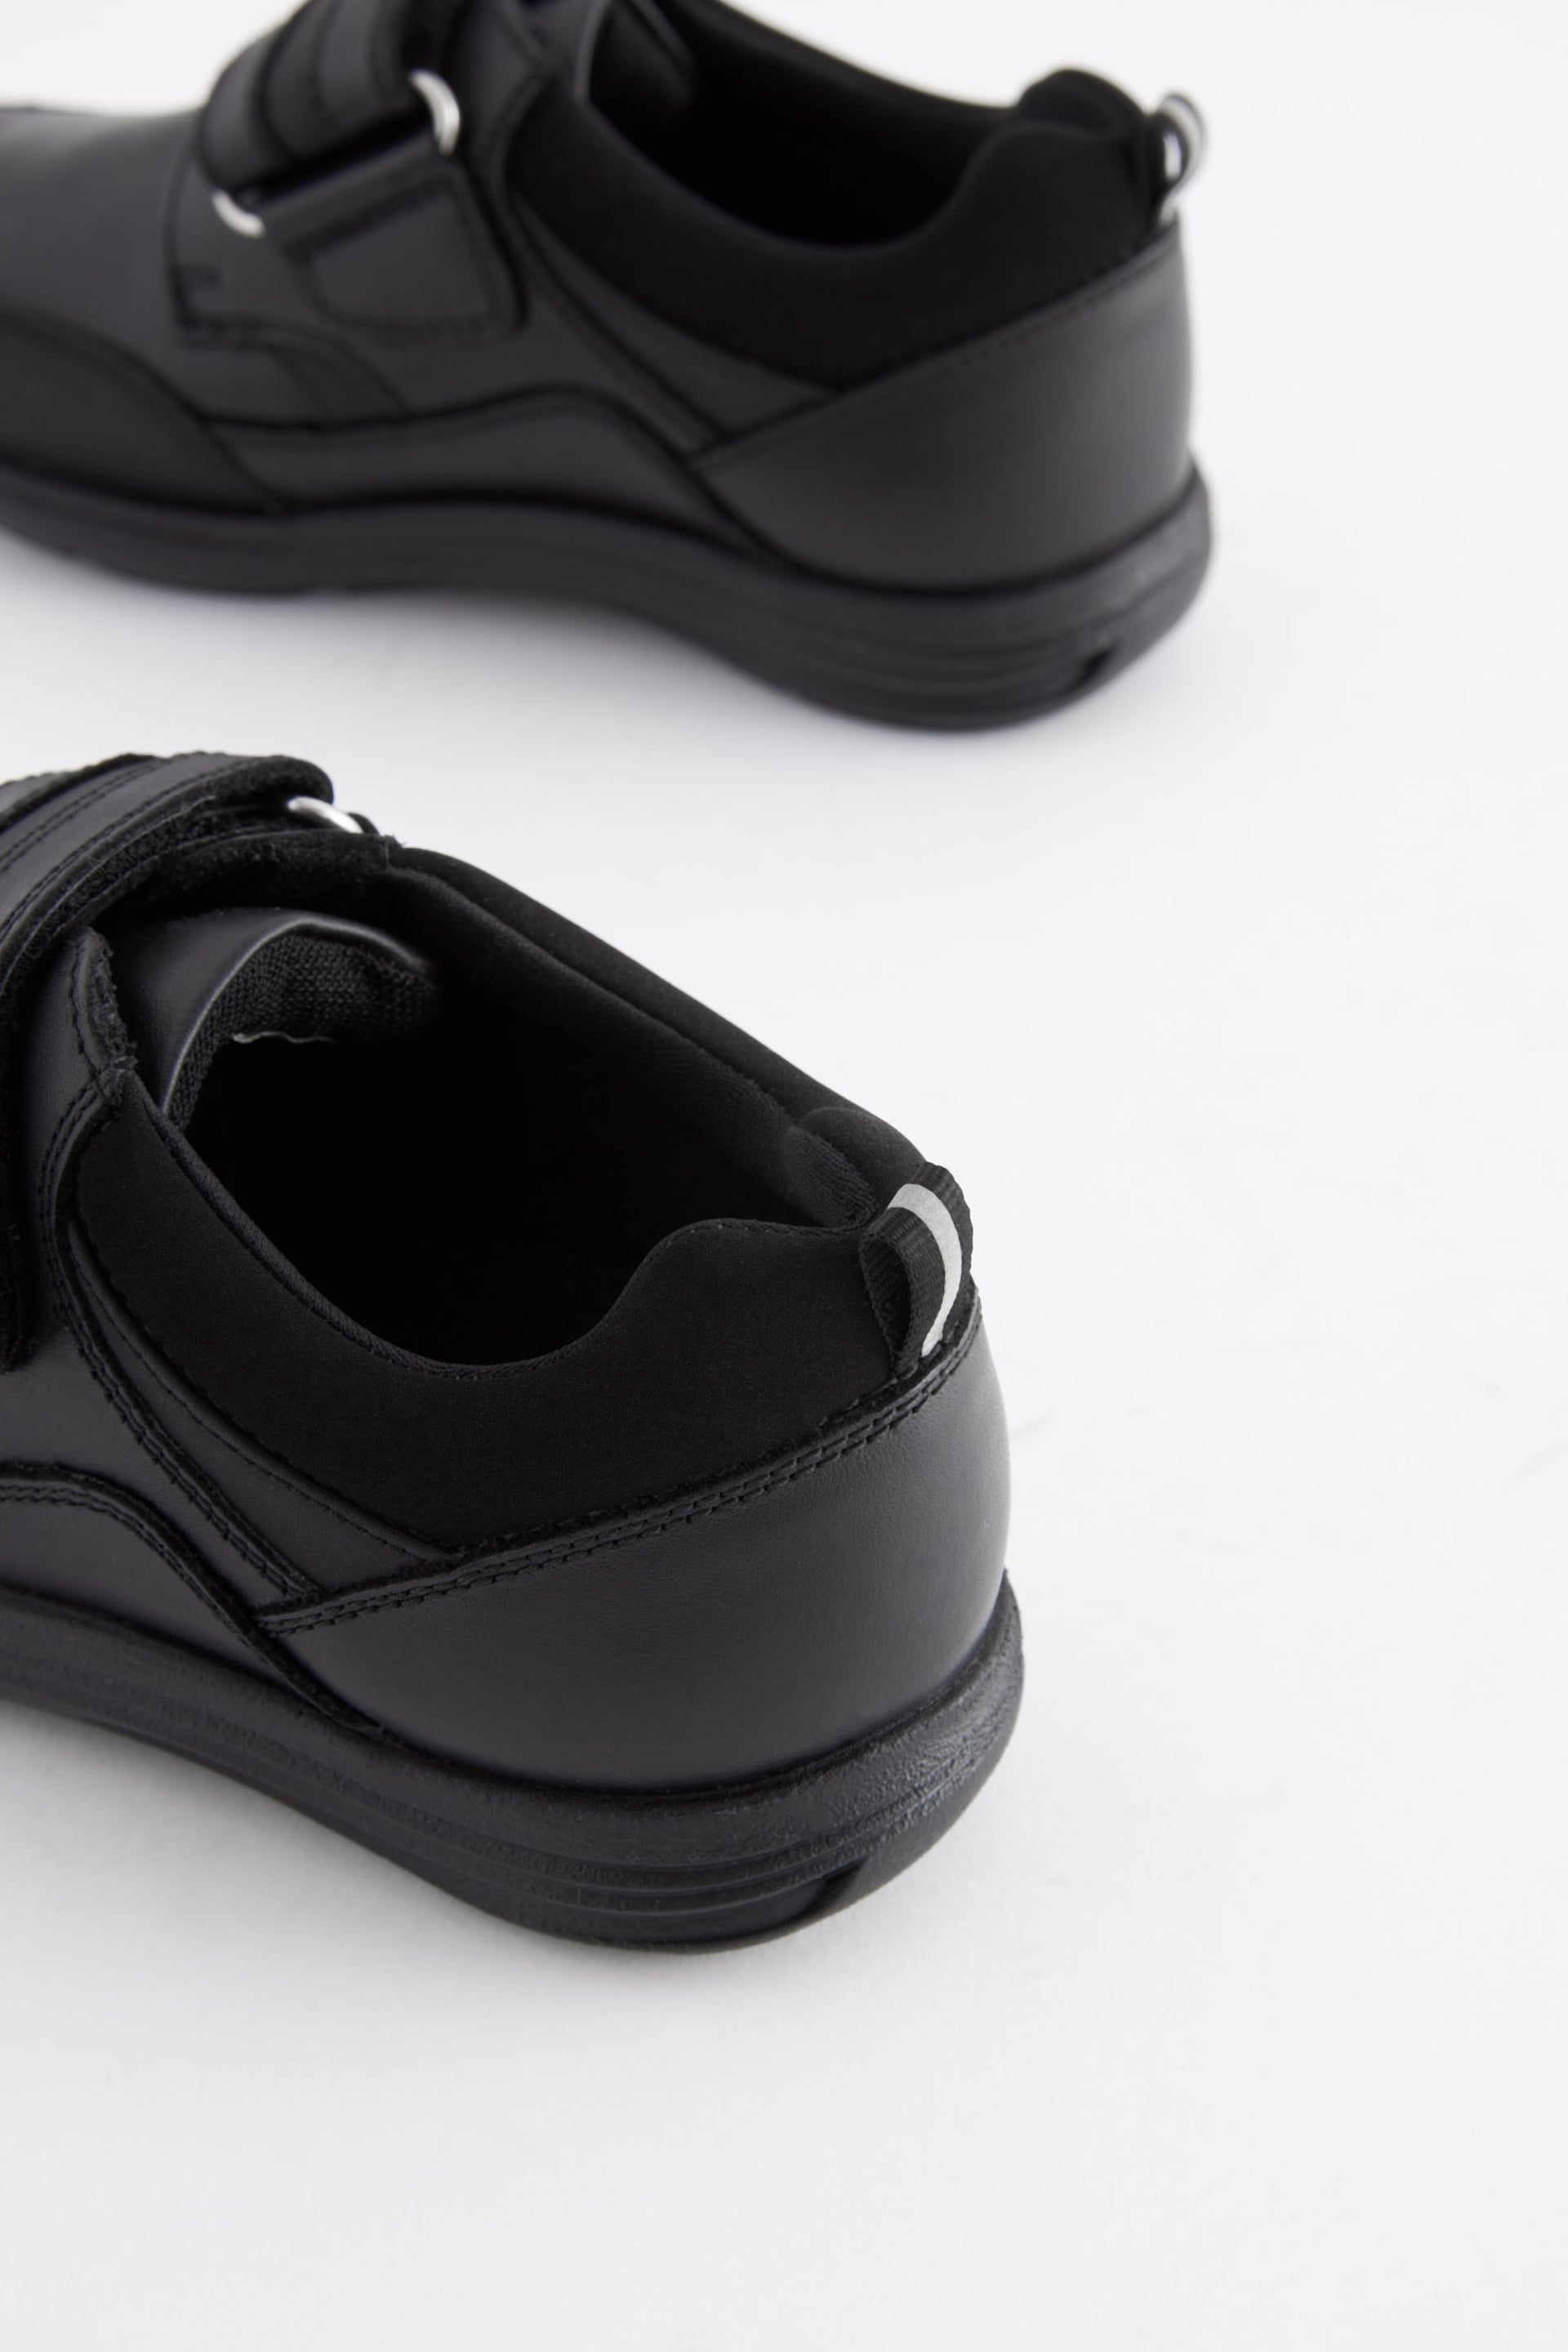 Black Standard Fit (F) School Leather Single Strap Shoes - Image 4 of 7